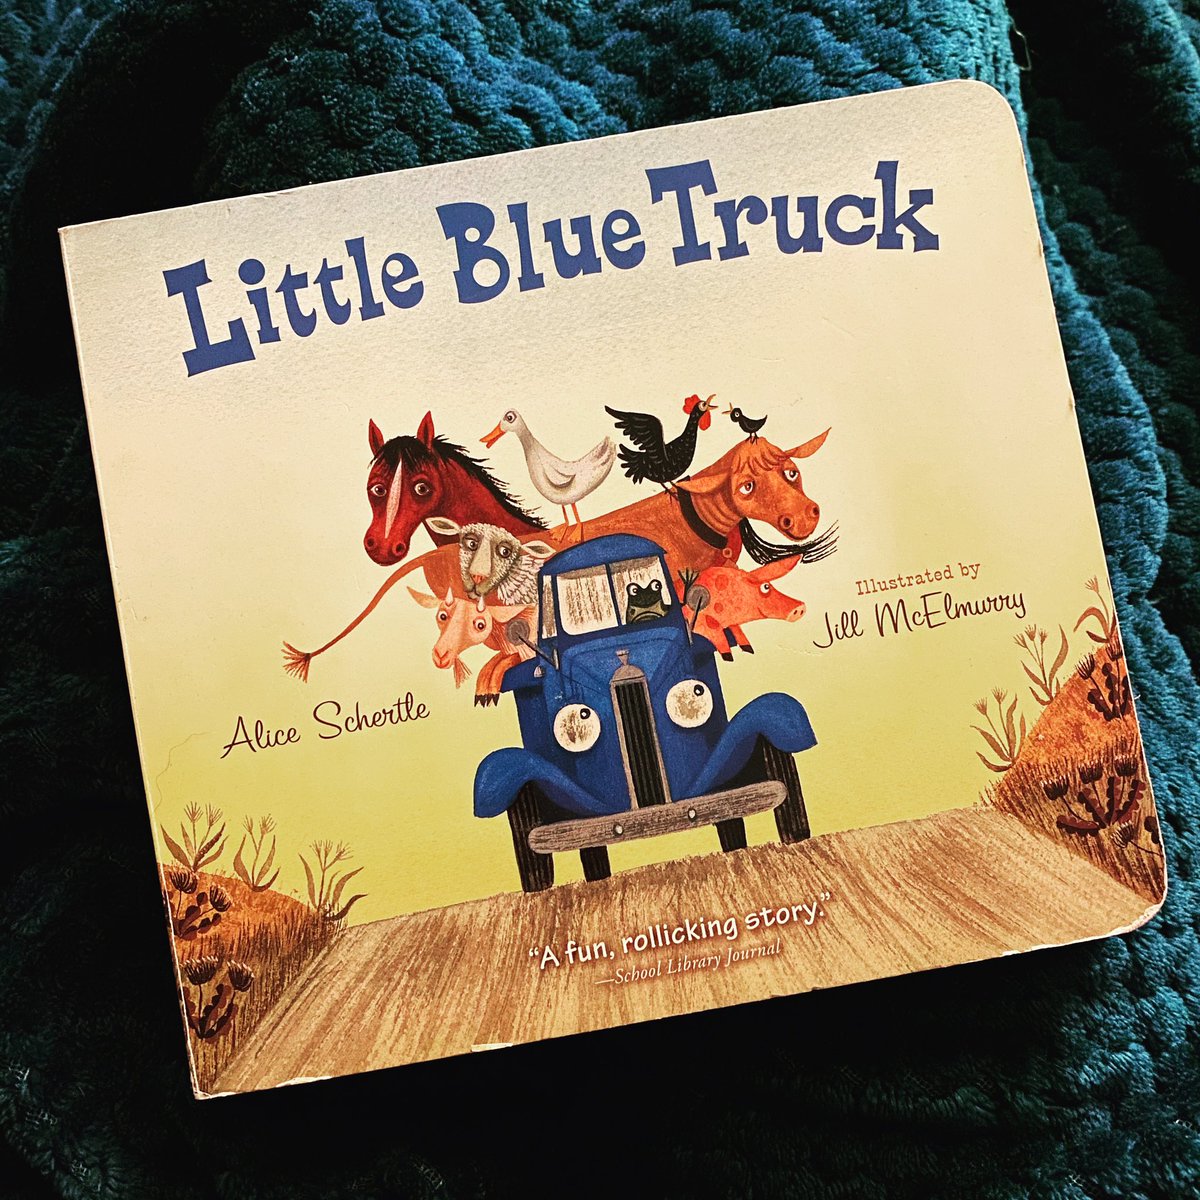 Read one of my favorite stories to the little man before bed tonight. #childrensbooks #mom #kids #bedtime #bedtimestories #author #writer #authormom #writermom